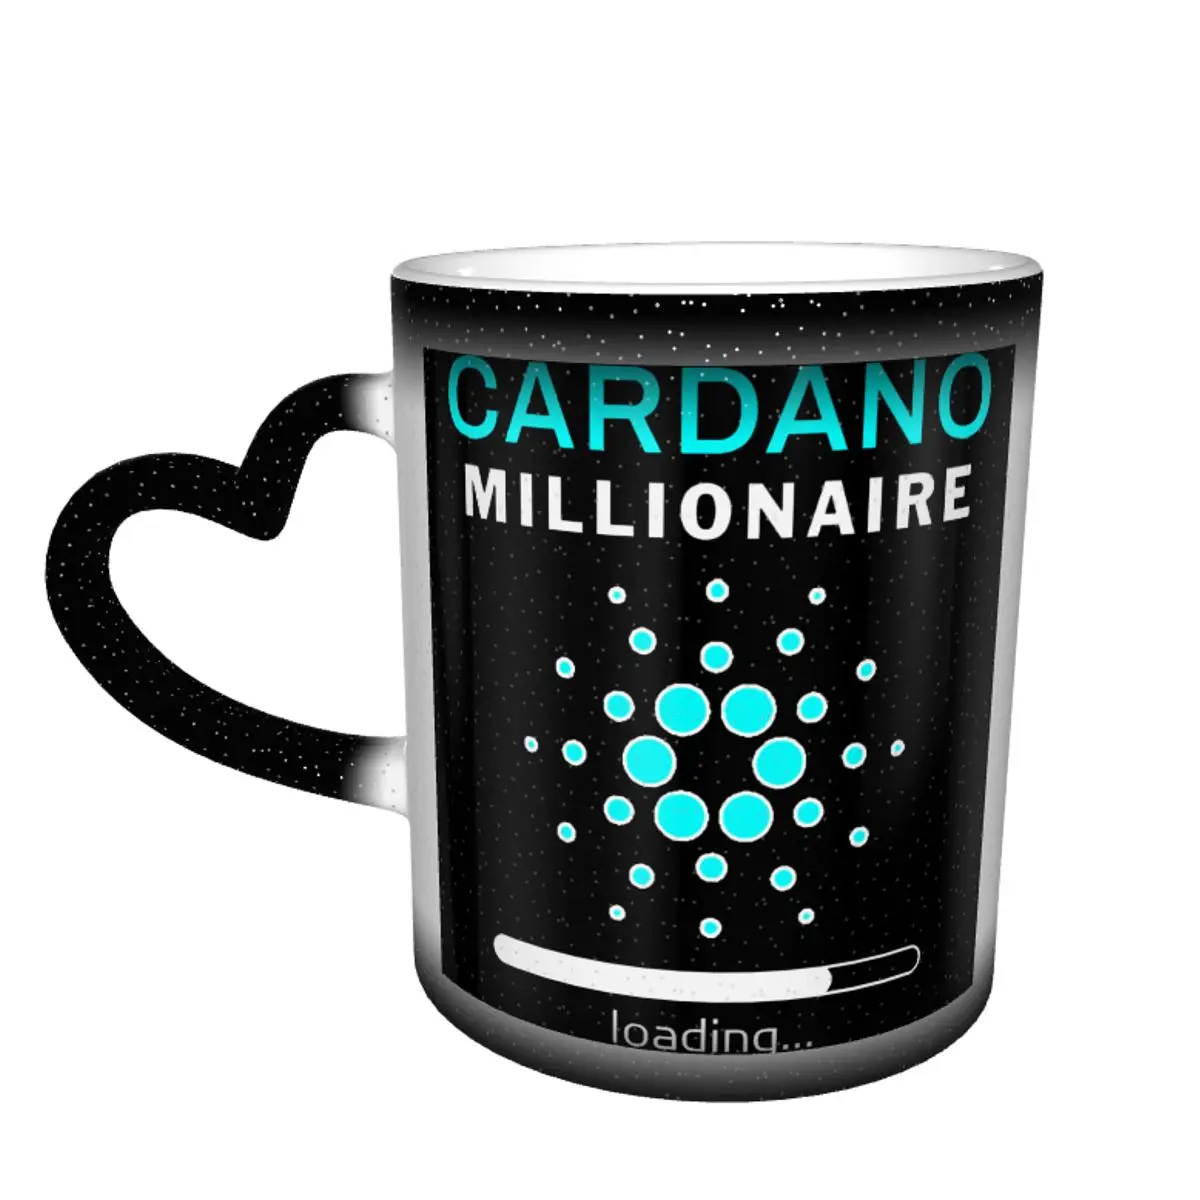 

Cardano Millionaire Color Changing Mug in the Sky Vintage Ceramic Heat-sensitive Cup Funny Novelty Cardano Crypto Milk cups